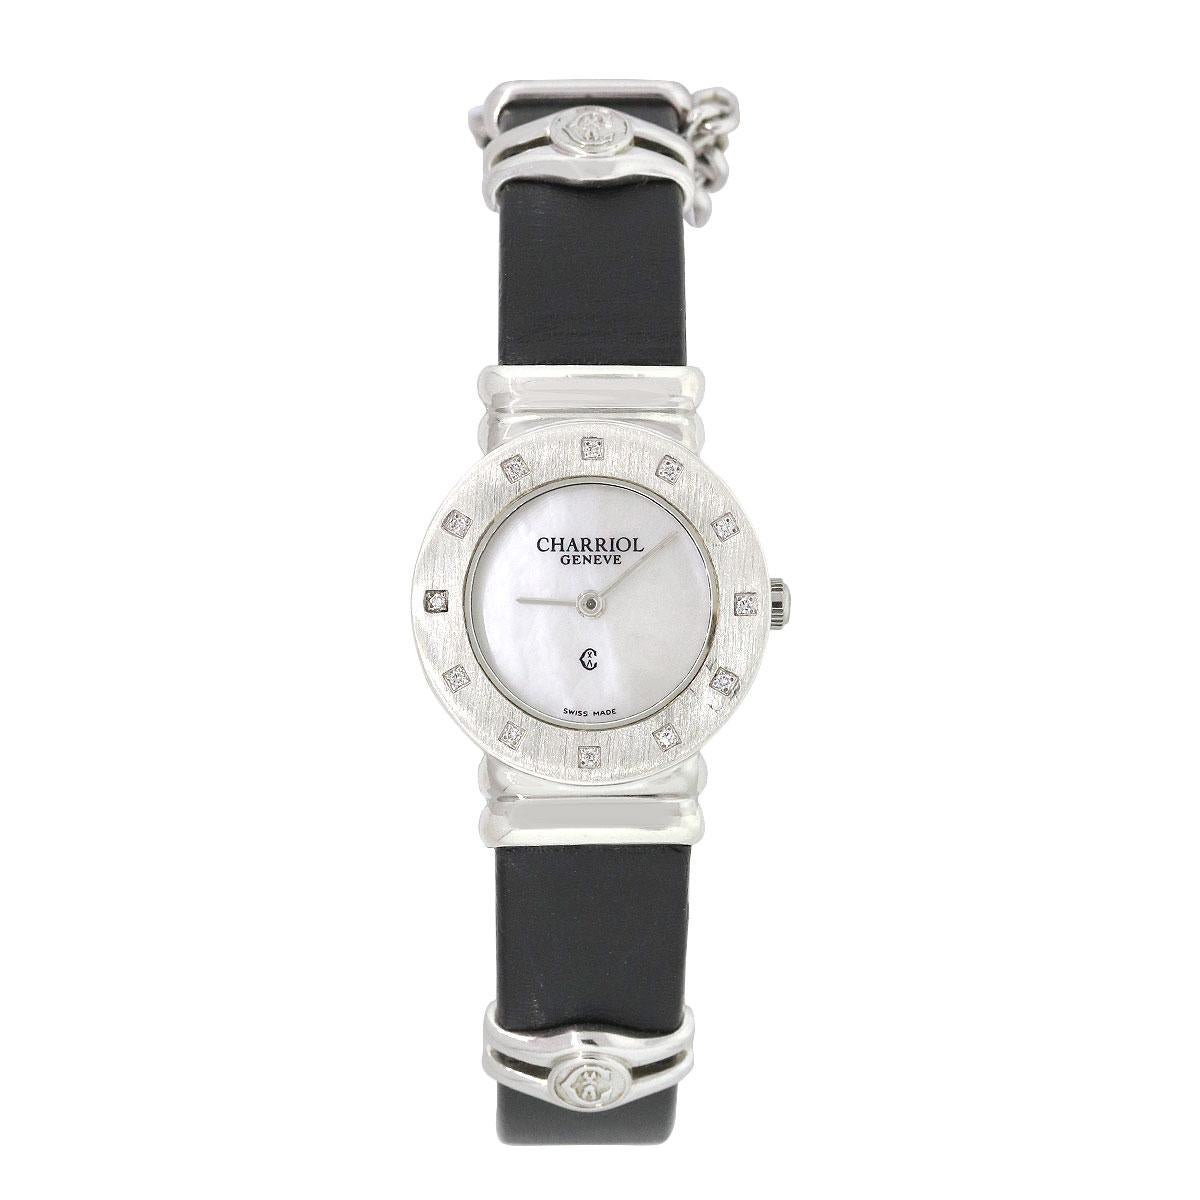 Brand: Philippe Charriol
Case Material: Sterling Silver
Case Diameter: 24mm
Crystal: Sapphire crystal
Bezel: Sterling Silver with diamonds
Dial: Mother of Pearl White Dial with silver hands
Bracelet: Black leather strap with sterling silver